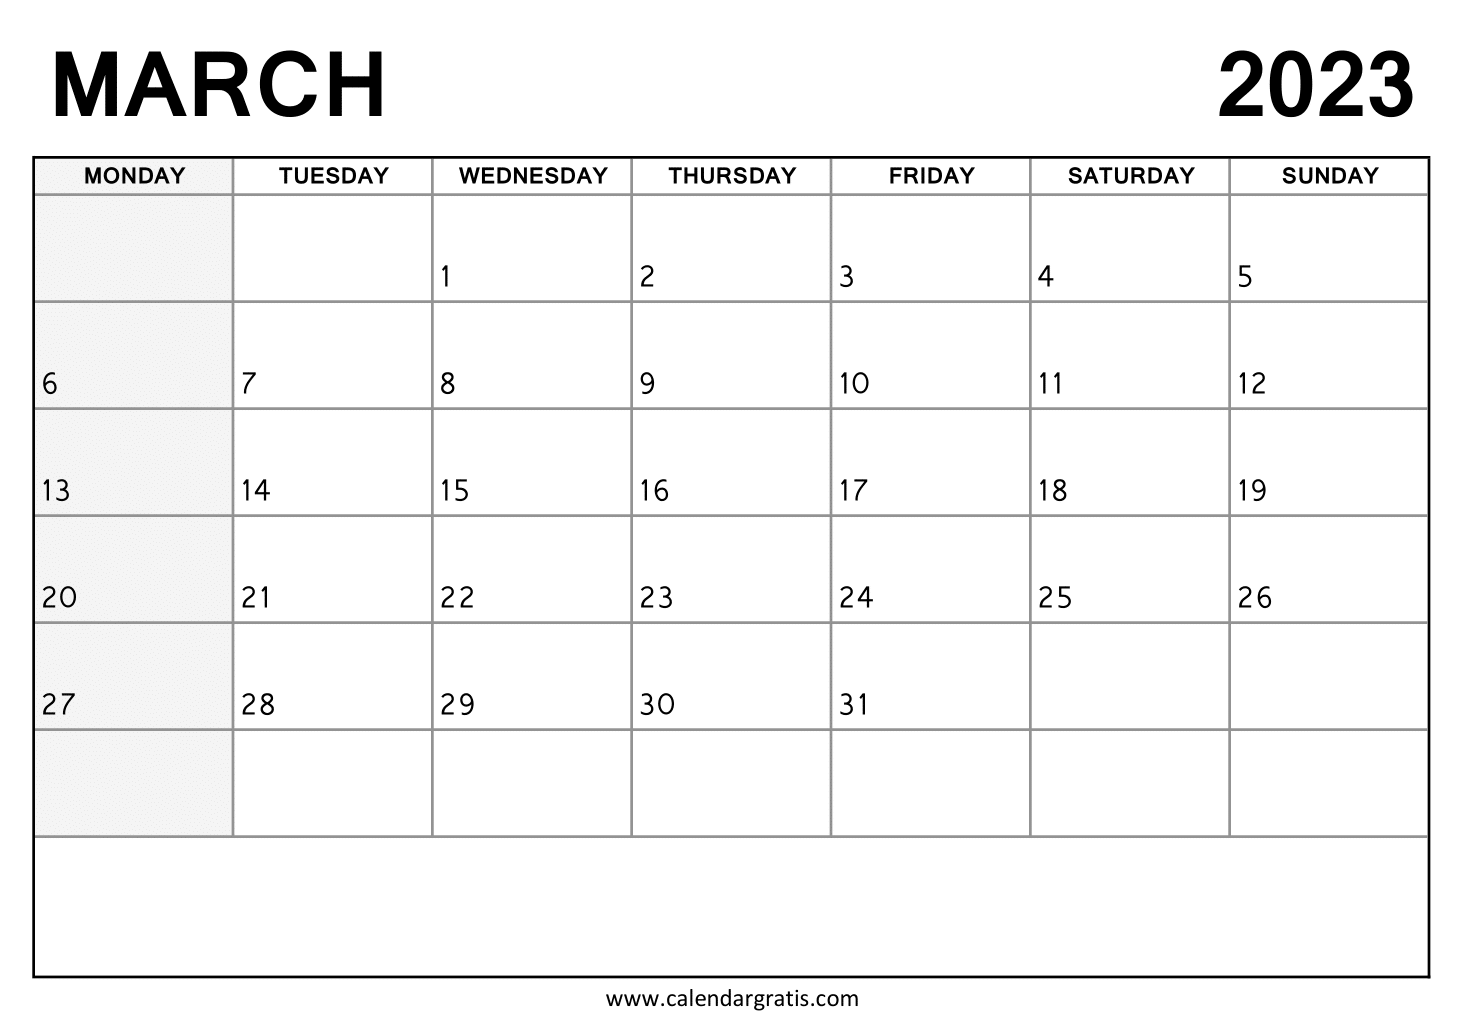 Free Printable March 2023 Calendar Monday to Sunday with Notes and Monday Highlight.